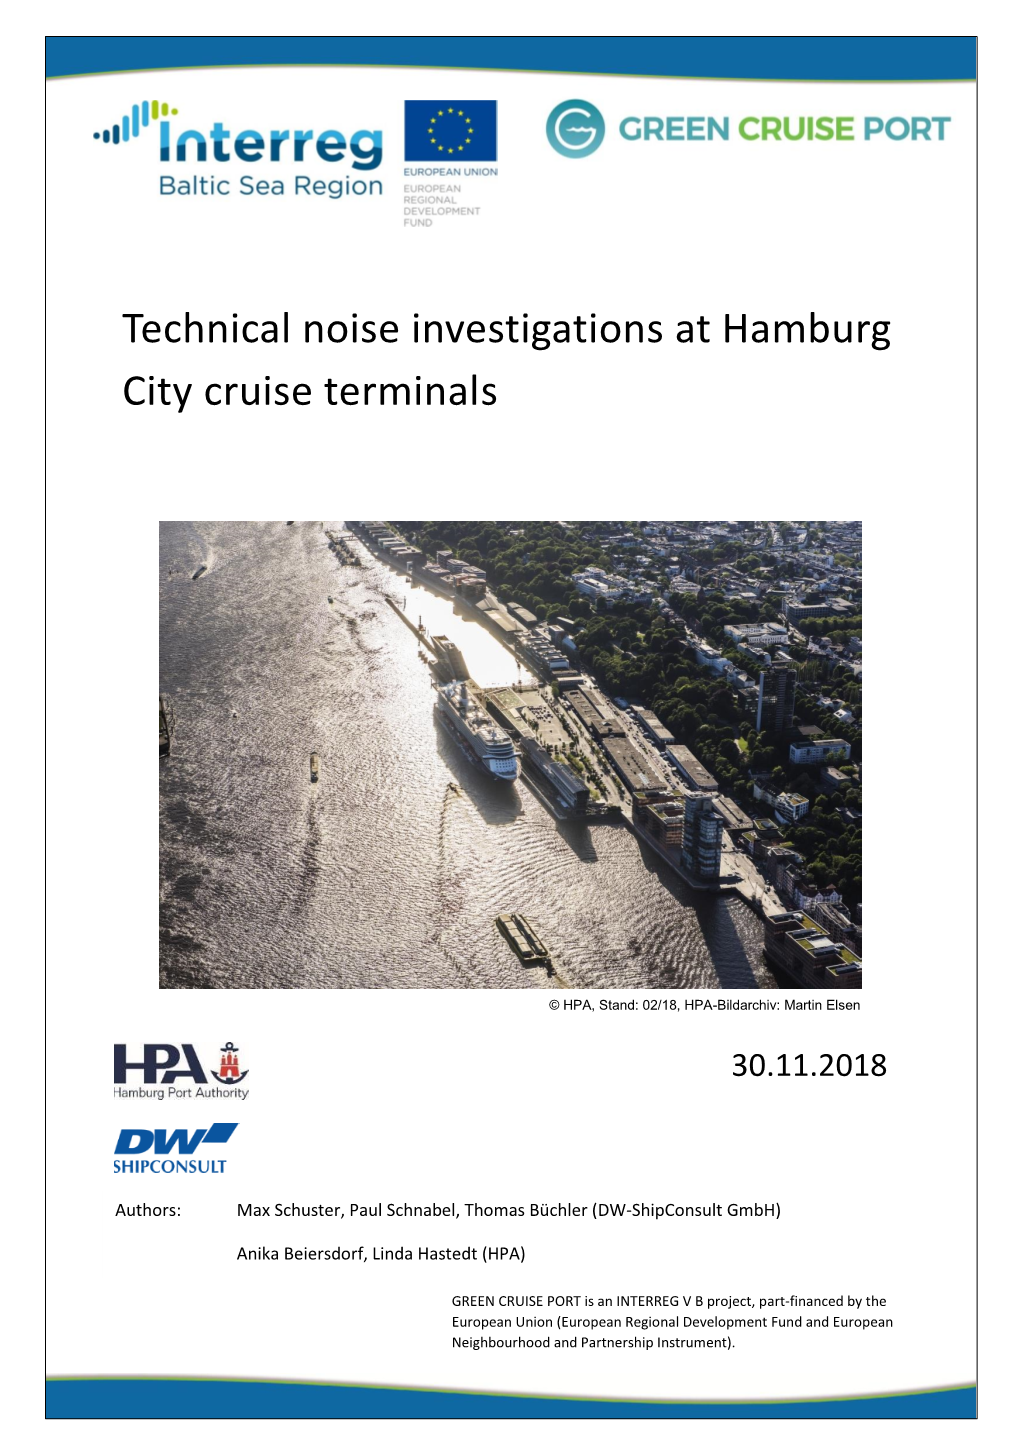 Technical Noise Investigations at Hamburg City Cruise Terminals